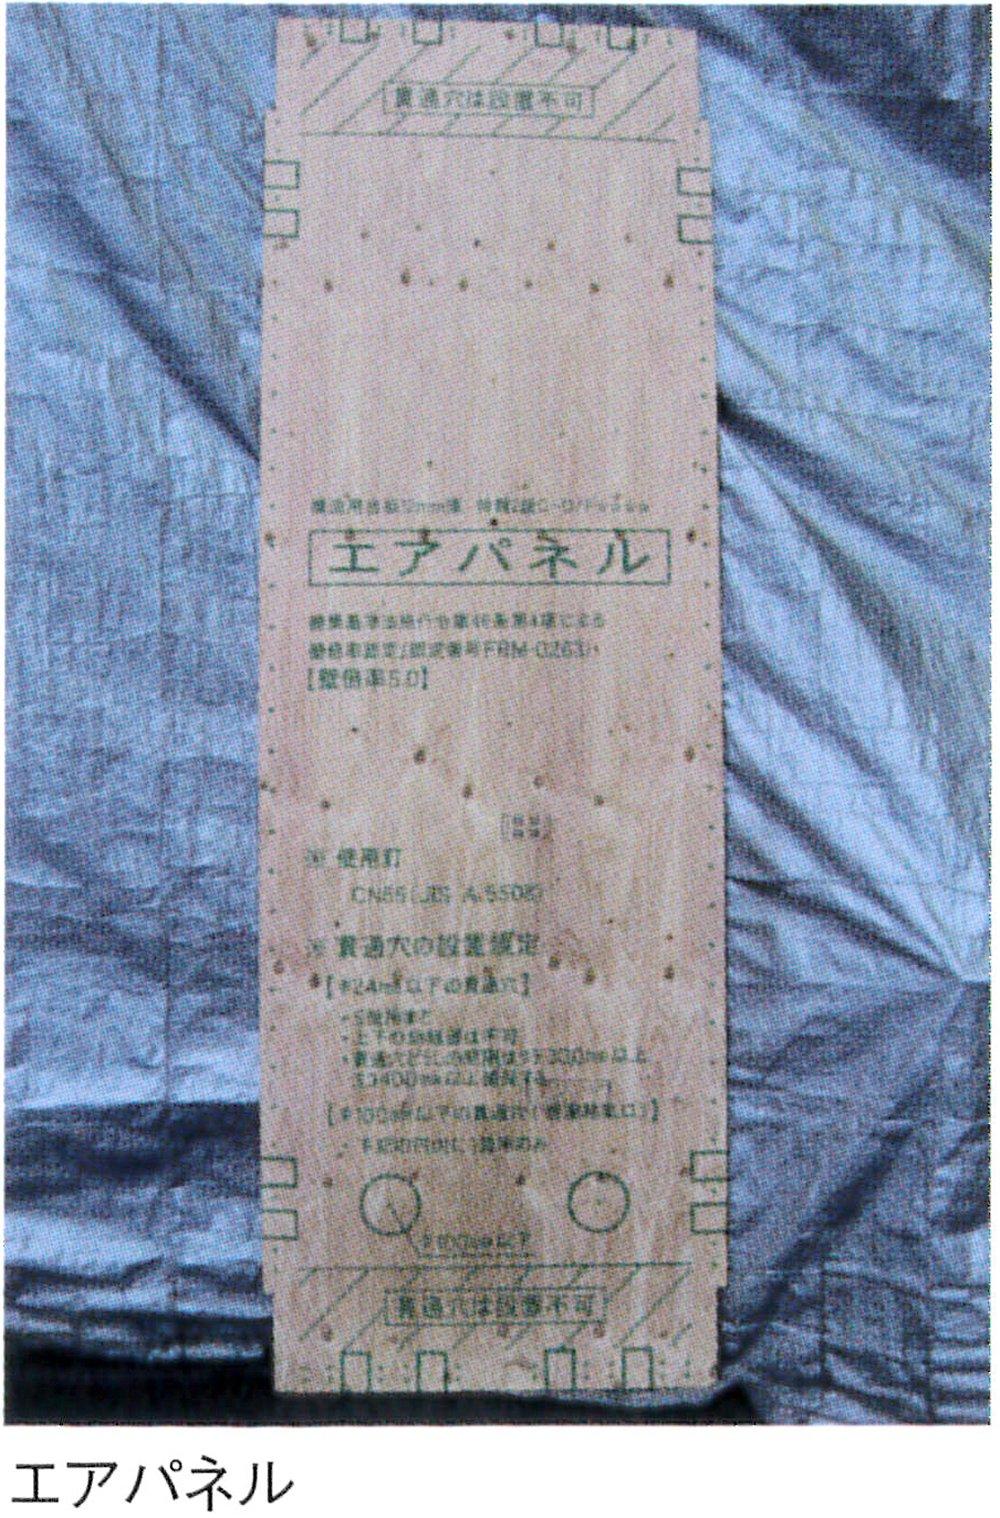 Other. Air panel is a "load-bearing wall" is, 2000 Building Standards Law amended, To get Japan's first Minister of Land, Infrastructure and Transport certification for structural strength major Jikukumi etc., Provisions on, With a strength of more than this "load-bearing wall" is not in the world! 